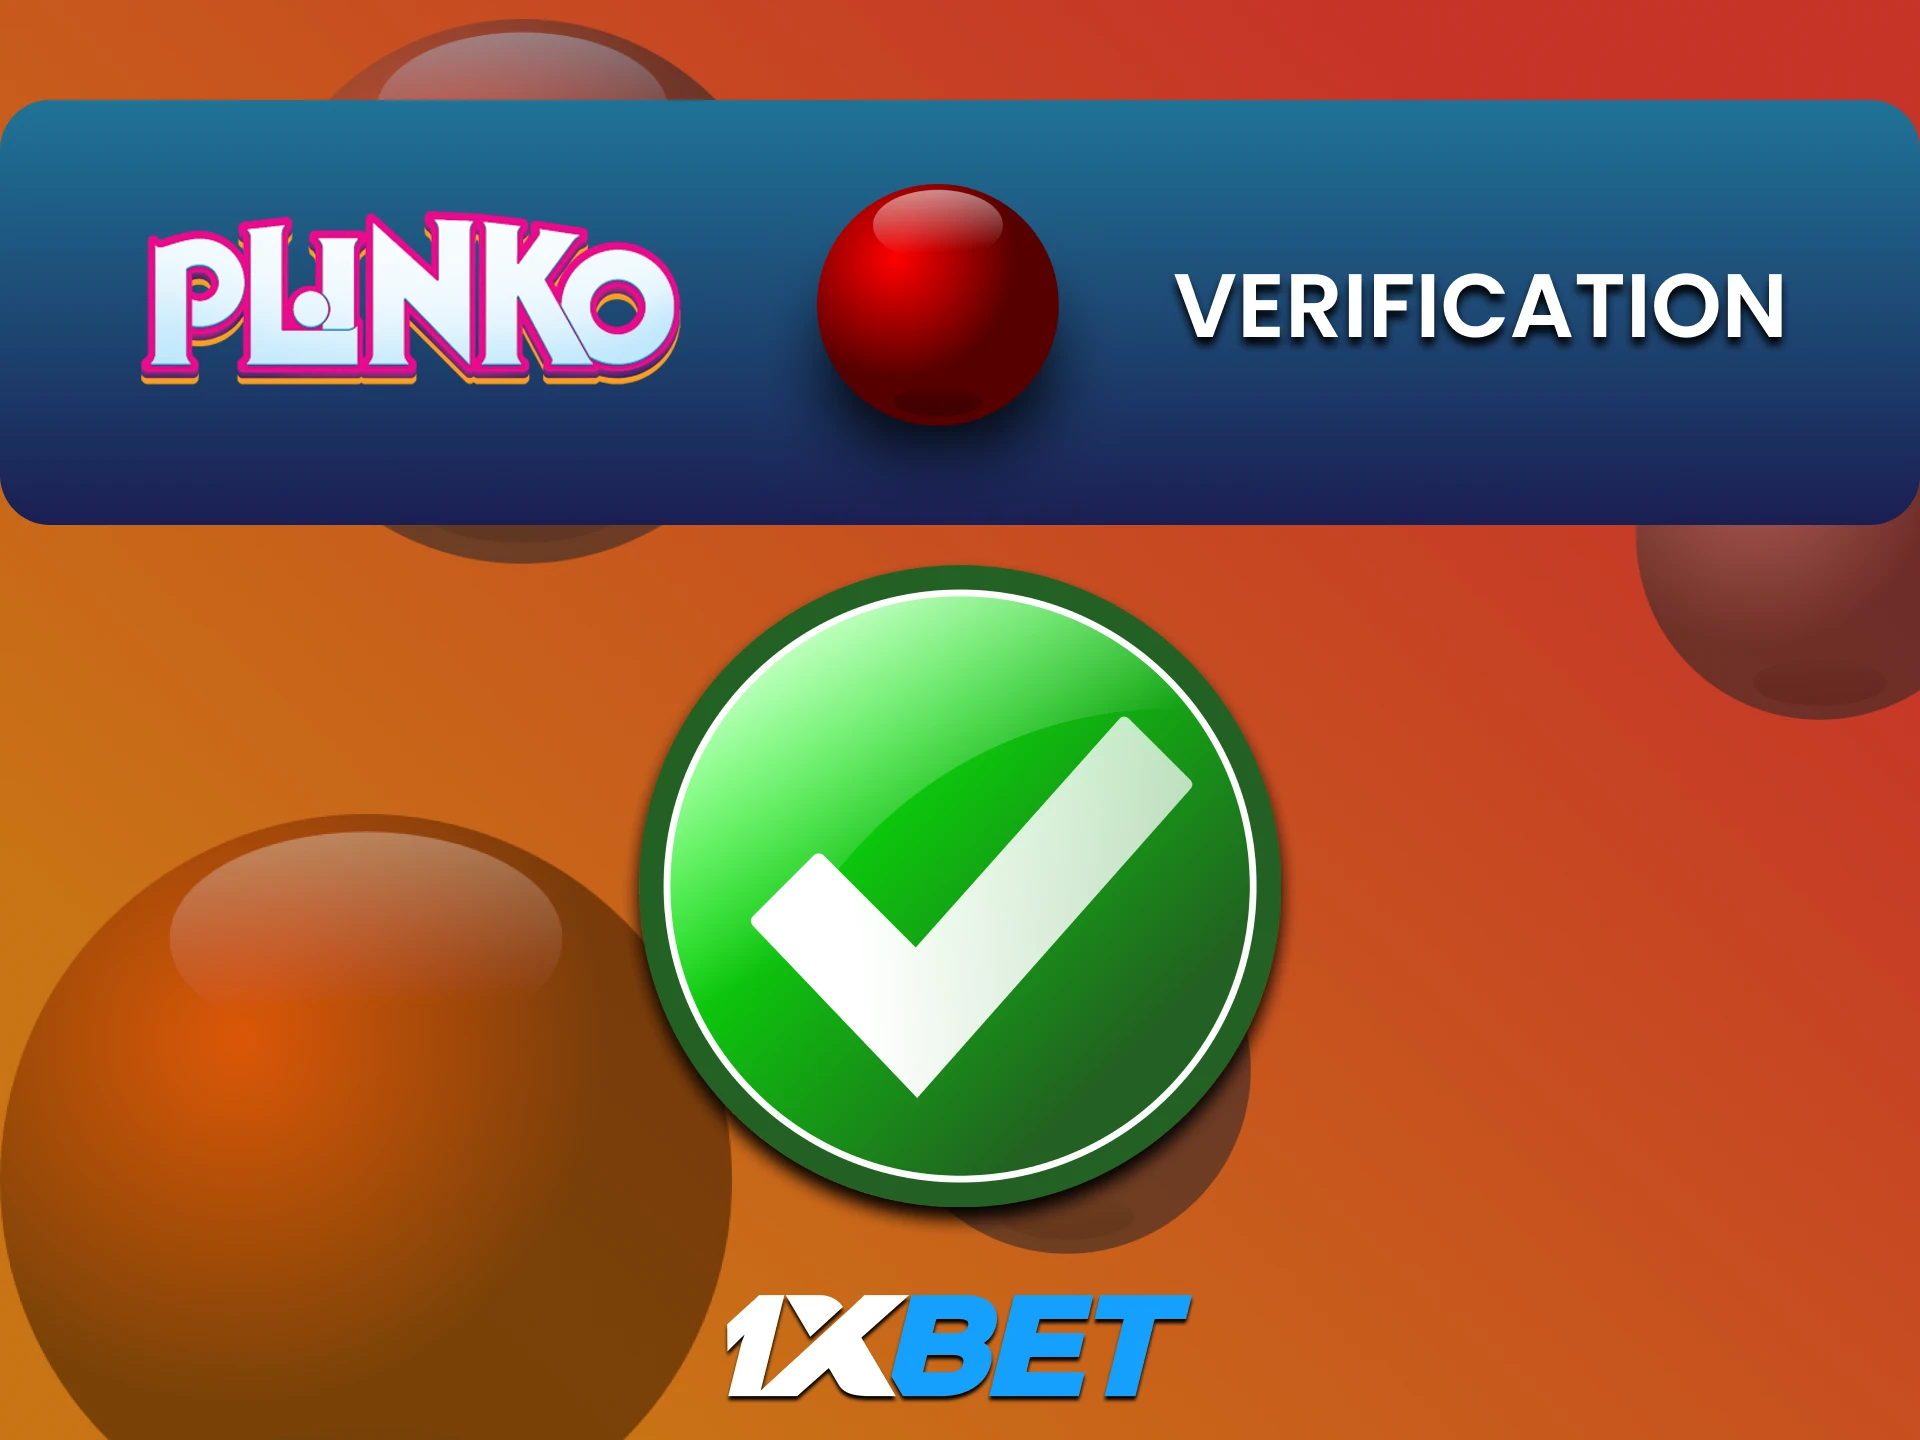 Fill in the necessary data on 1xbet to play Plinko.